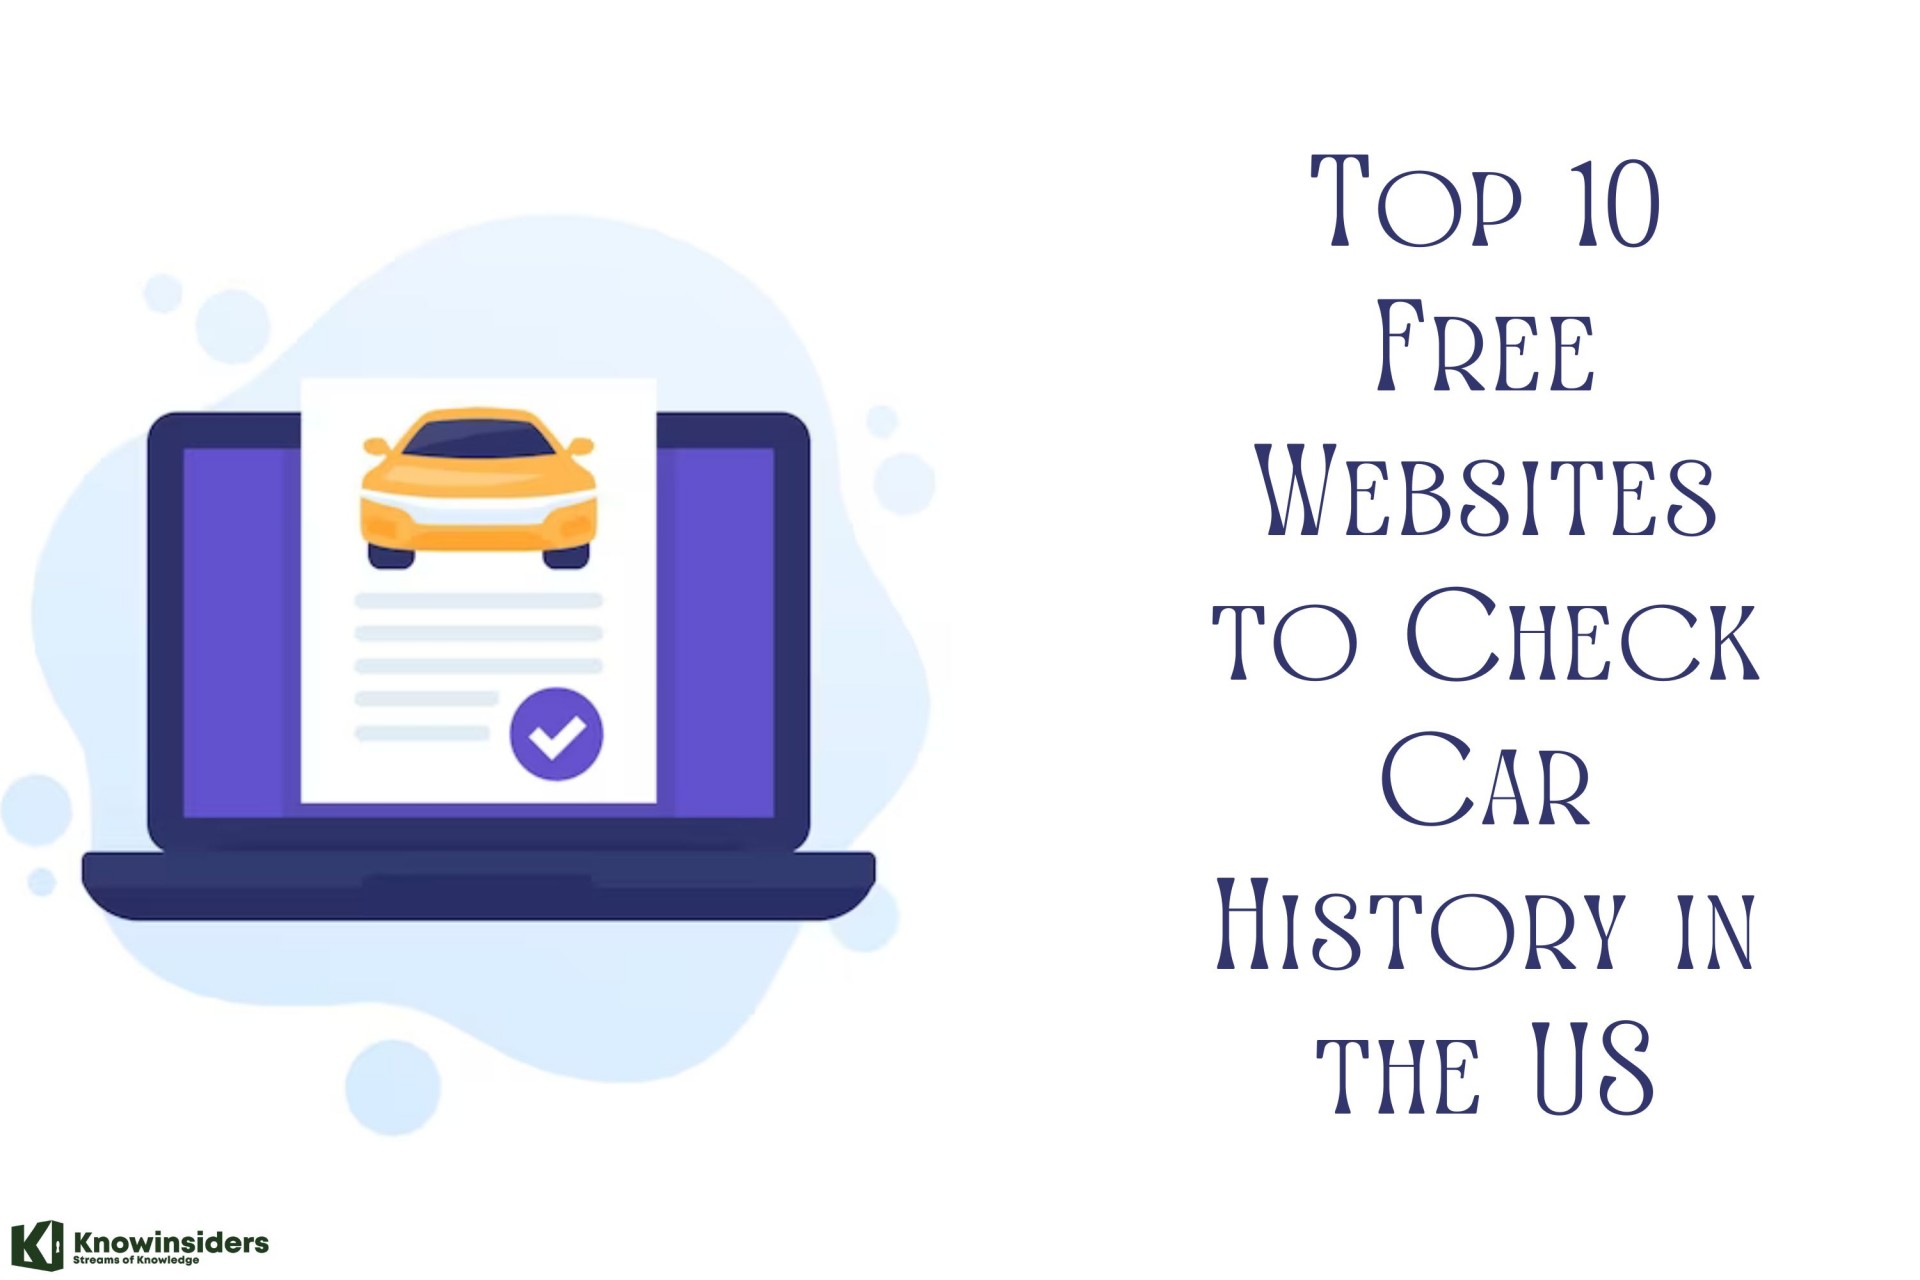 How to Check A Car History in the U.S - Top 10 Free Websites